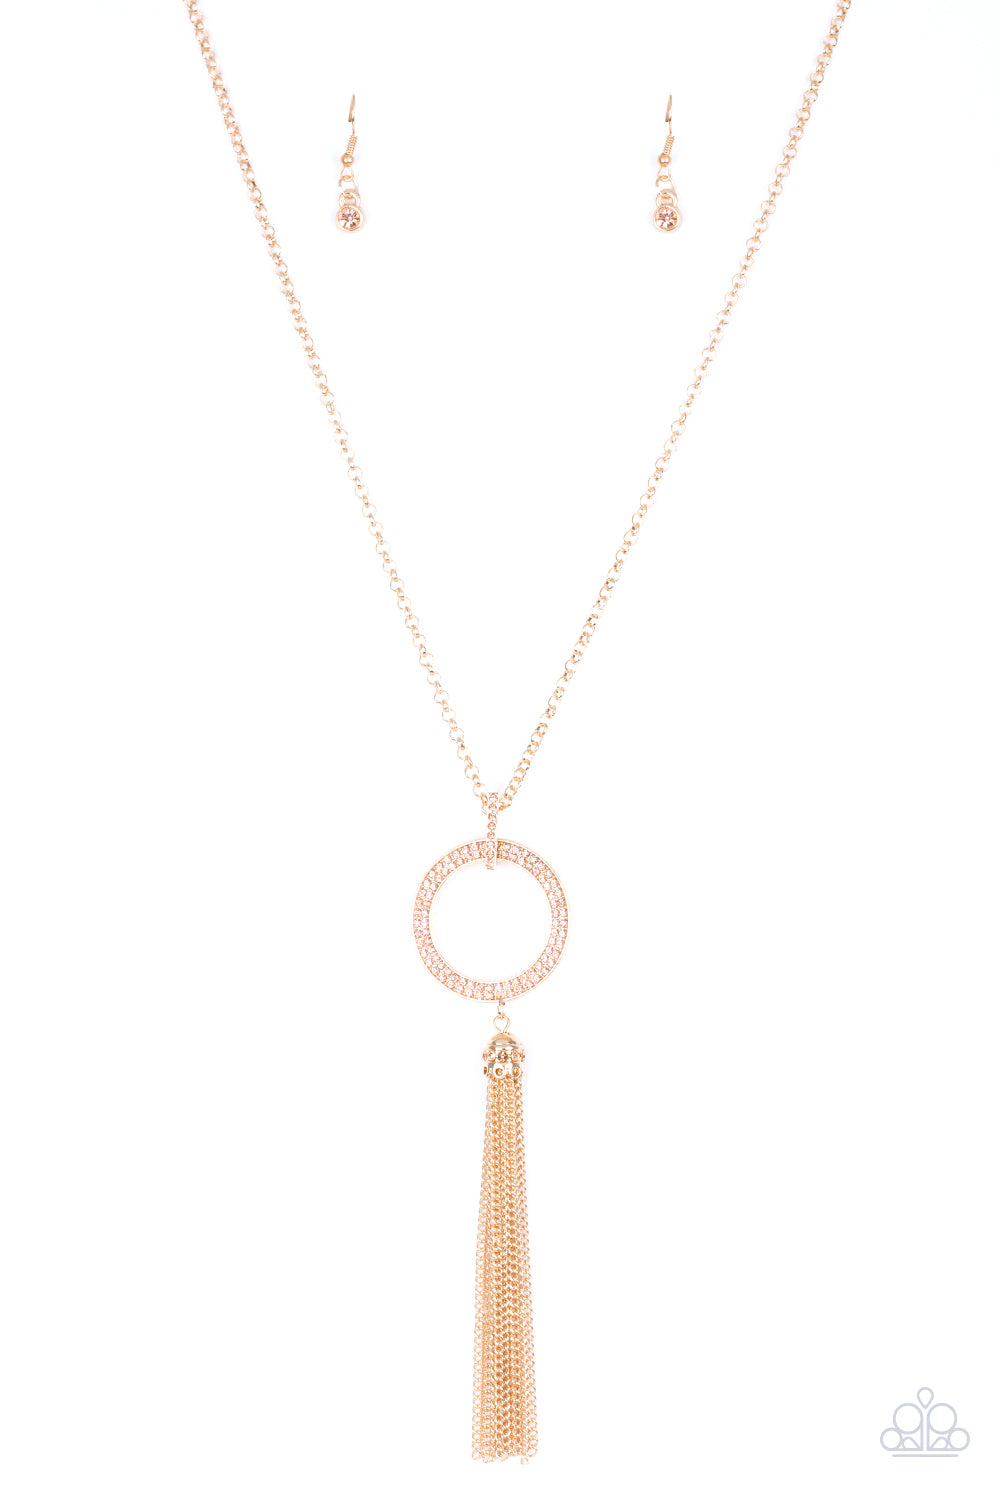 Paparazzi Accessories - Straight To The Top - Gold Necklace - Alies Bling Bar